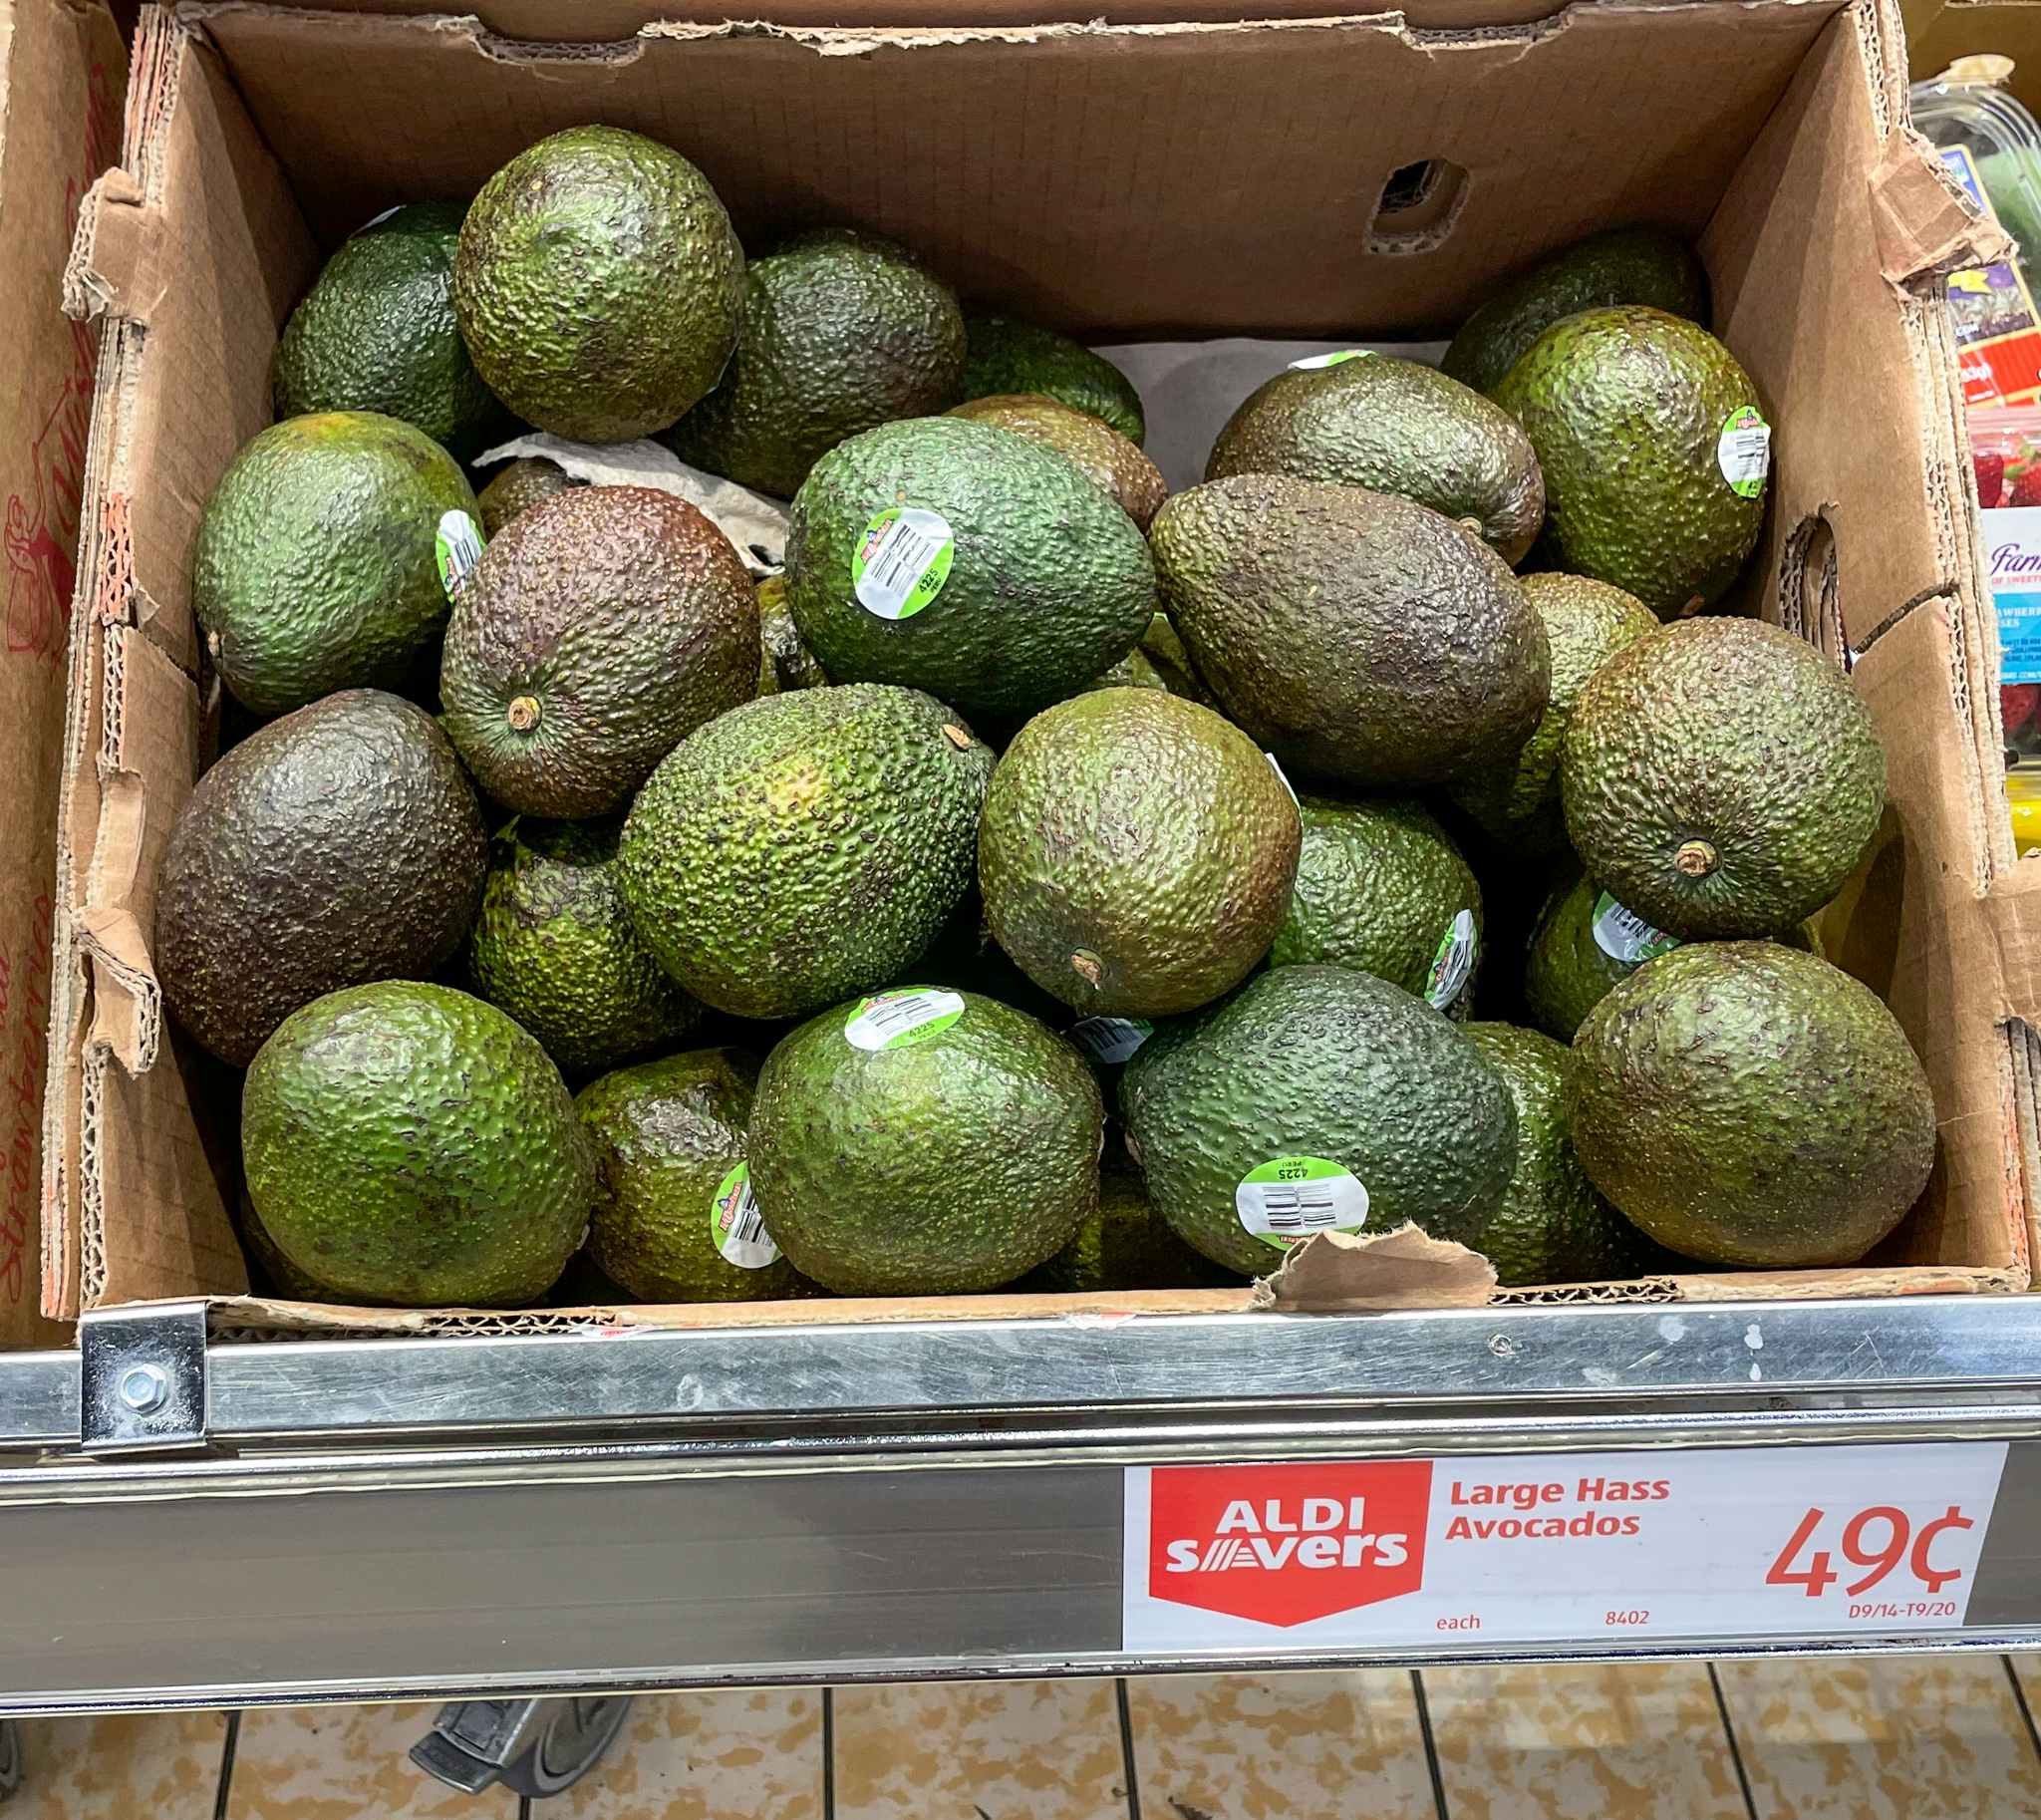 avocados in a box at aldi with sale sign